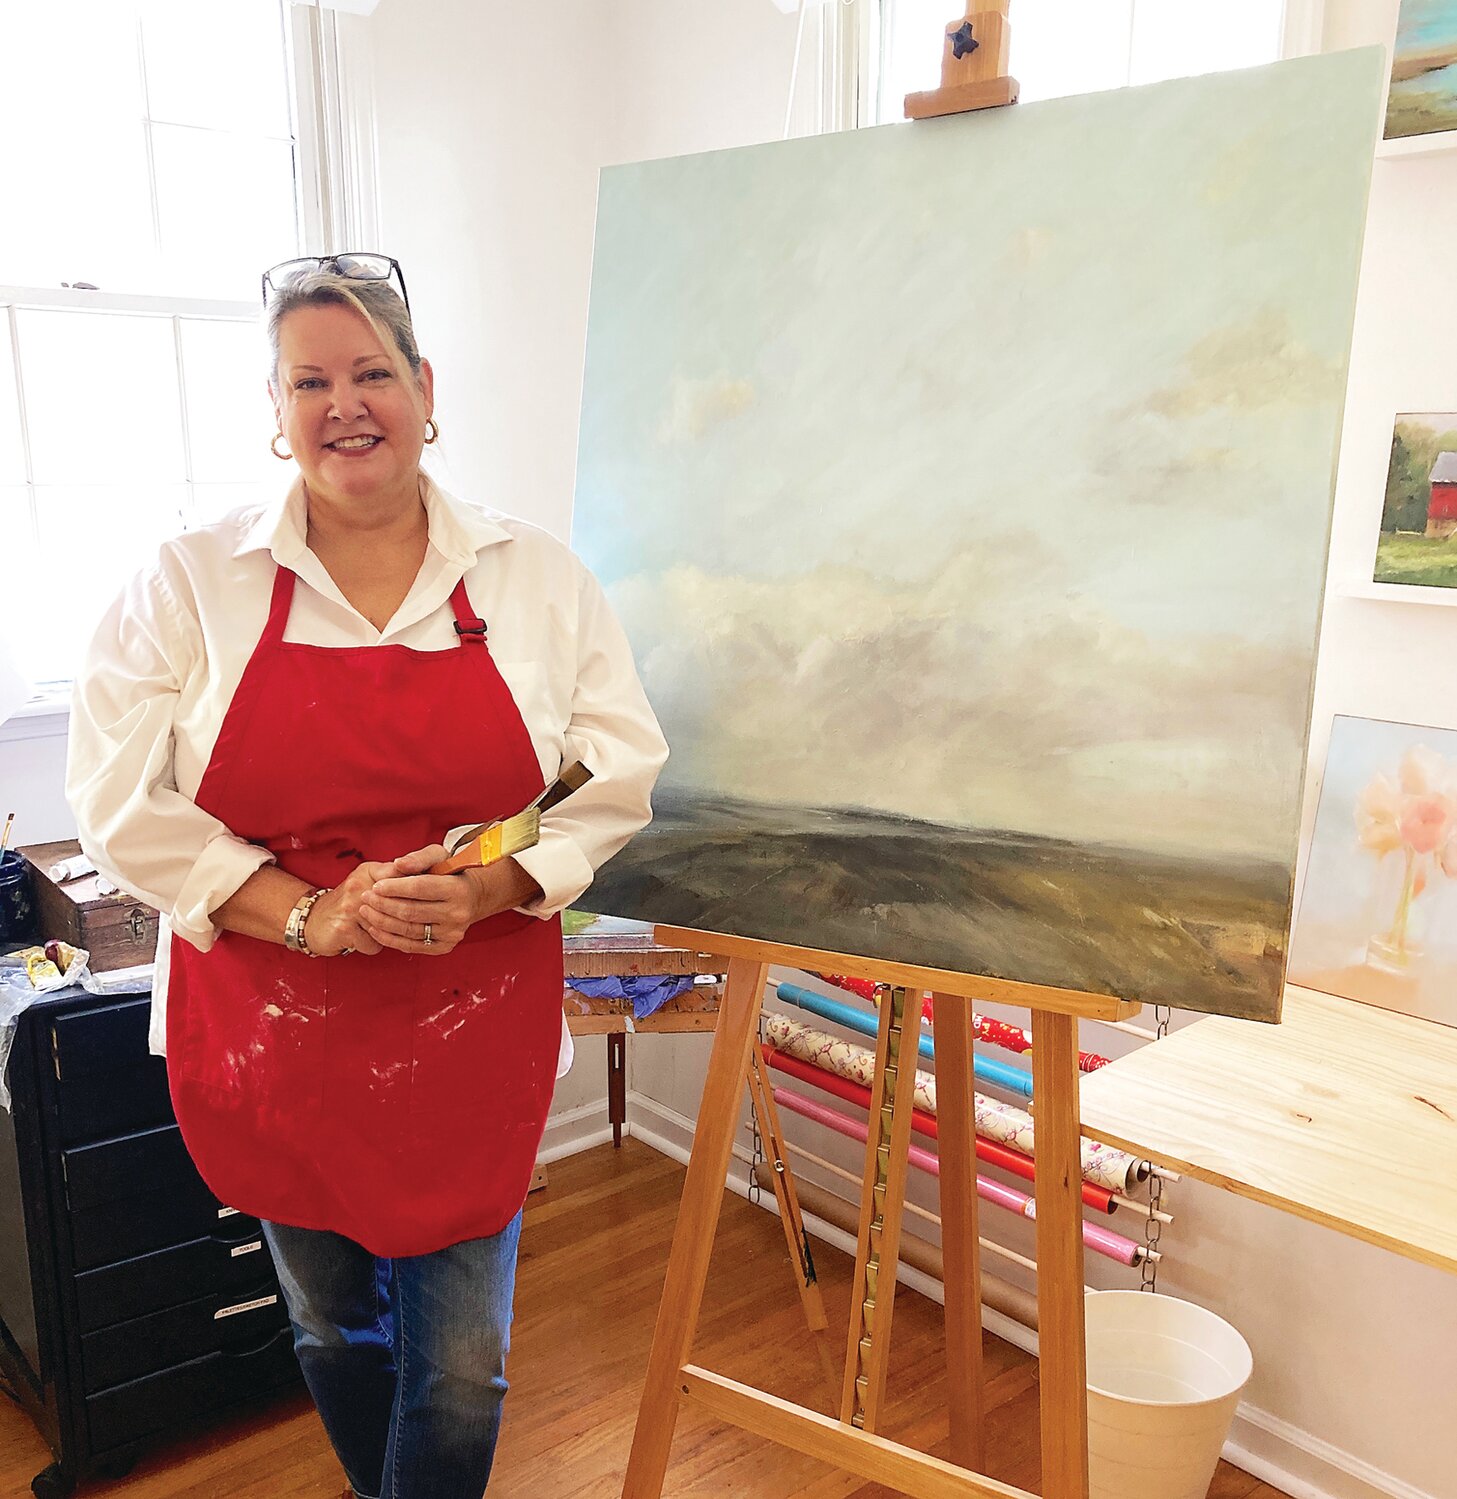 Featured Artist Cindy Roesinger will be painting live at the Tinicum Arts Festival at 11 a.m. Saturday, July 8, near the Discovery Tent.